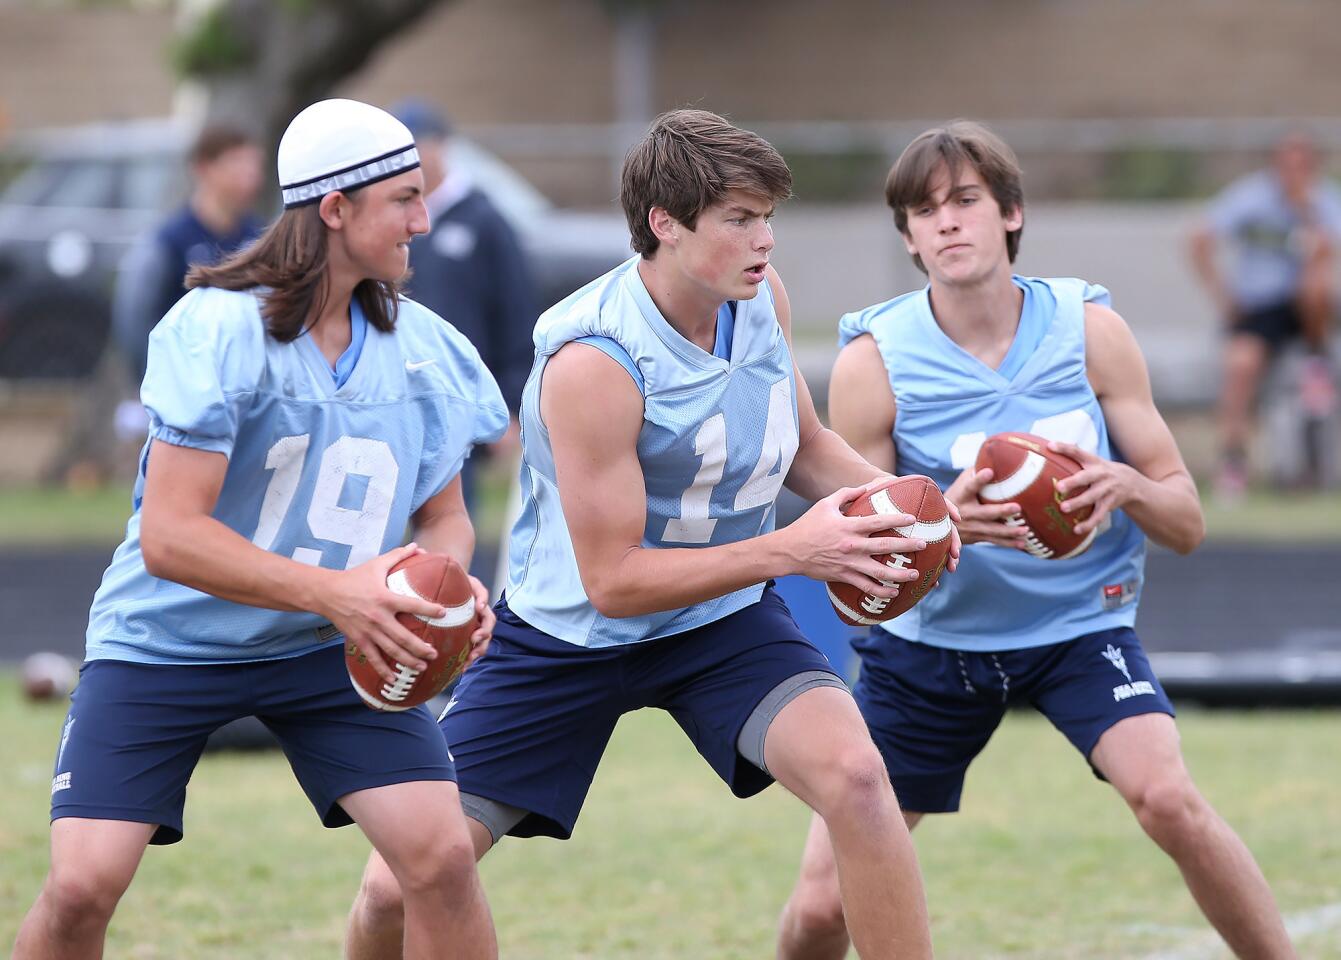 Quarterback Ethan Garbers, center, runs a play with fellow quarterbacks Dane Voorhees, left, during a spring football showcase at Corona del Mar High on Wednesday.